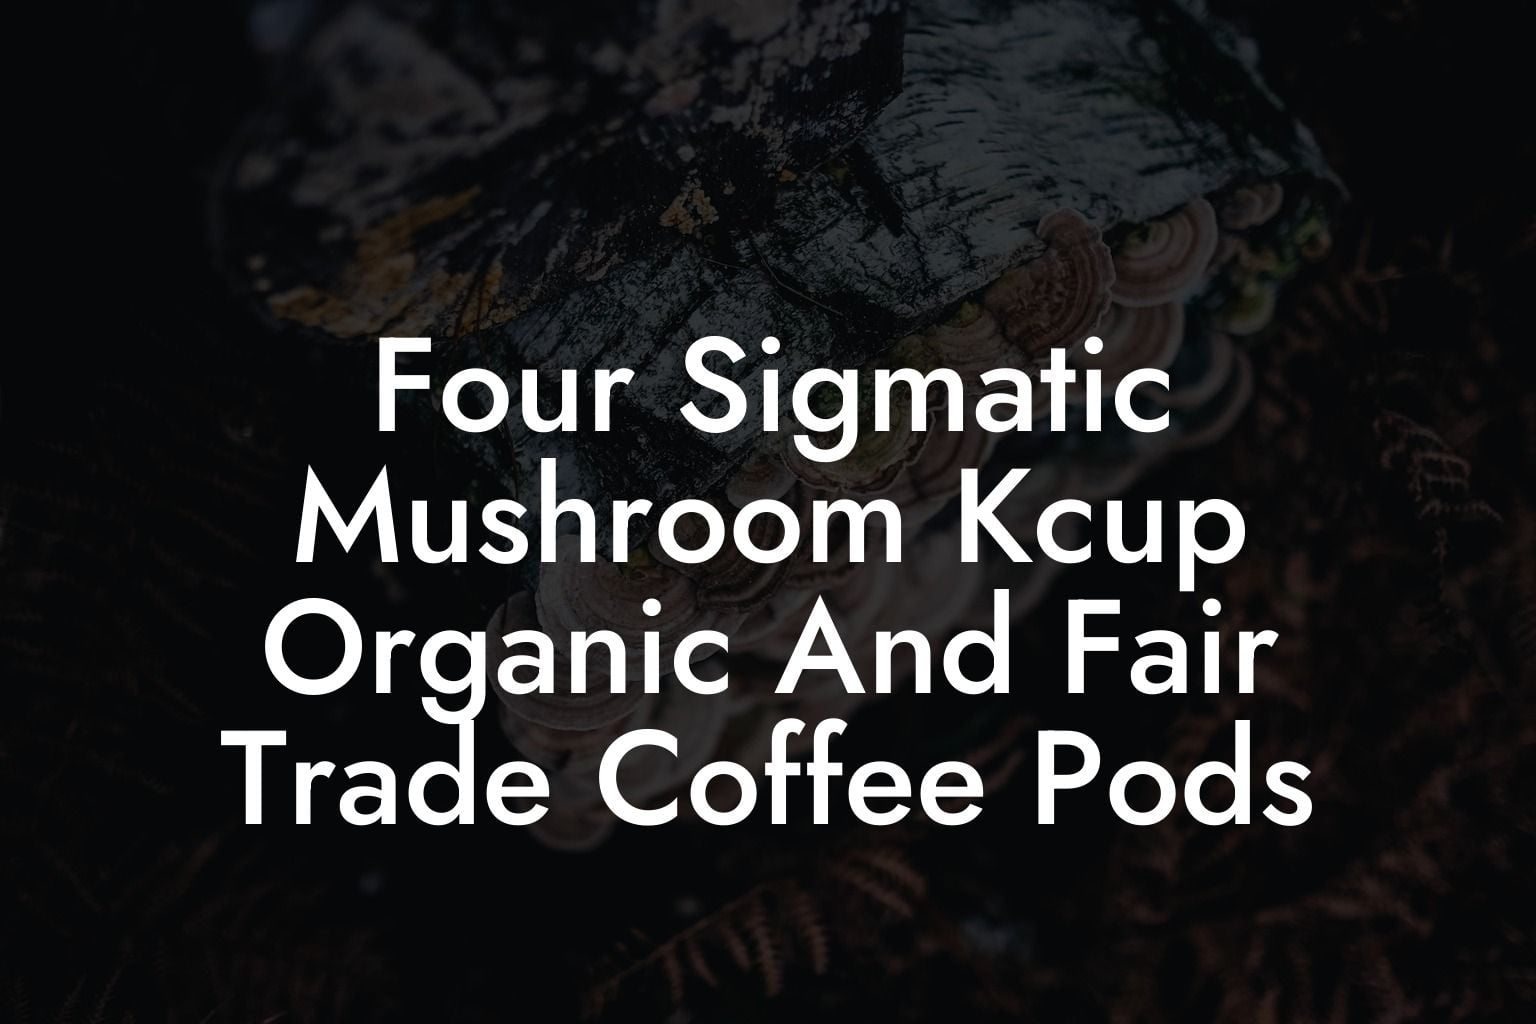 Four Sigmatic Mushroom Kcup Organic And Fair Trade Coffee Pods